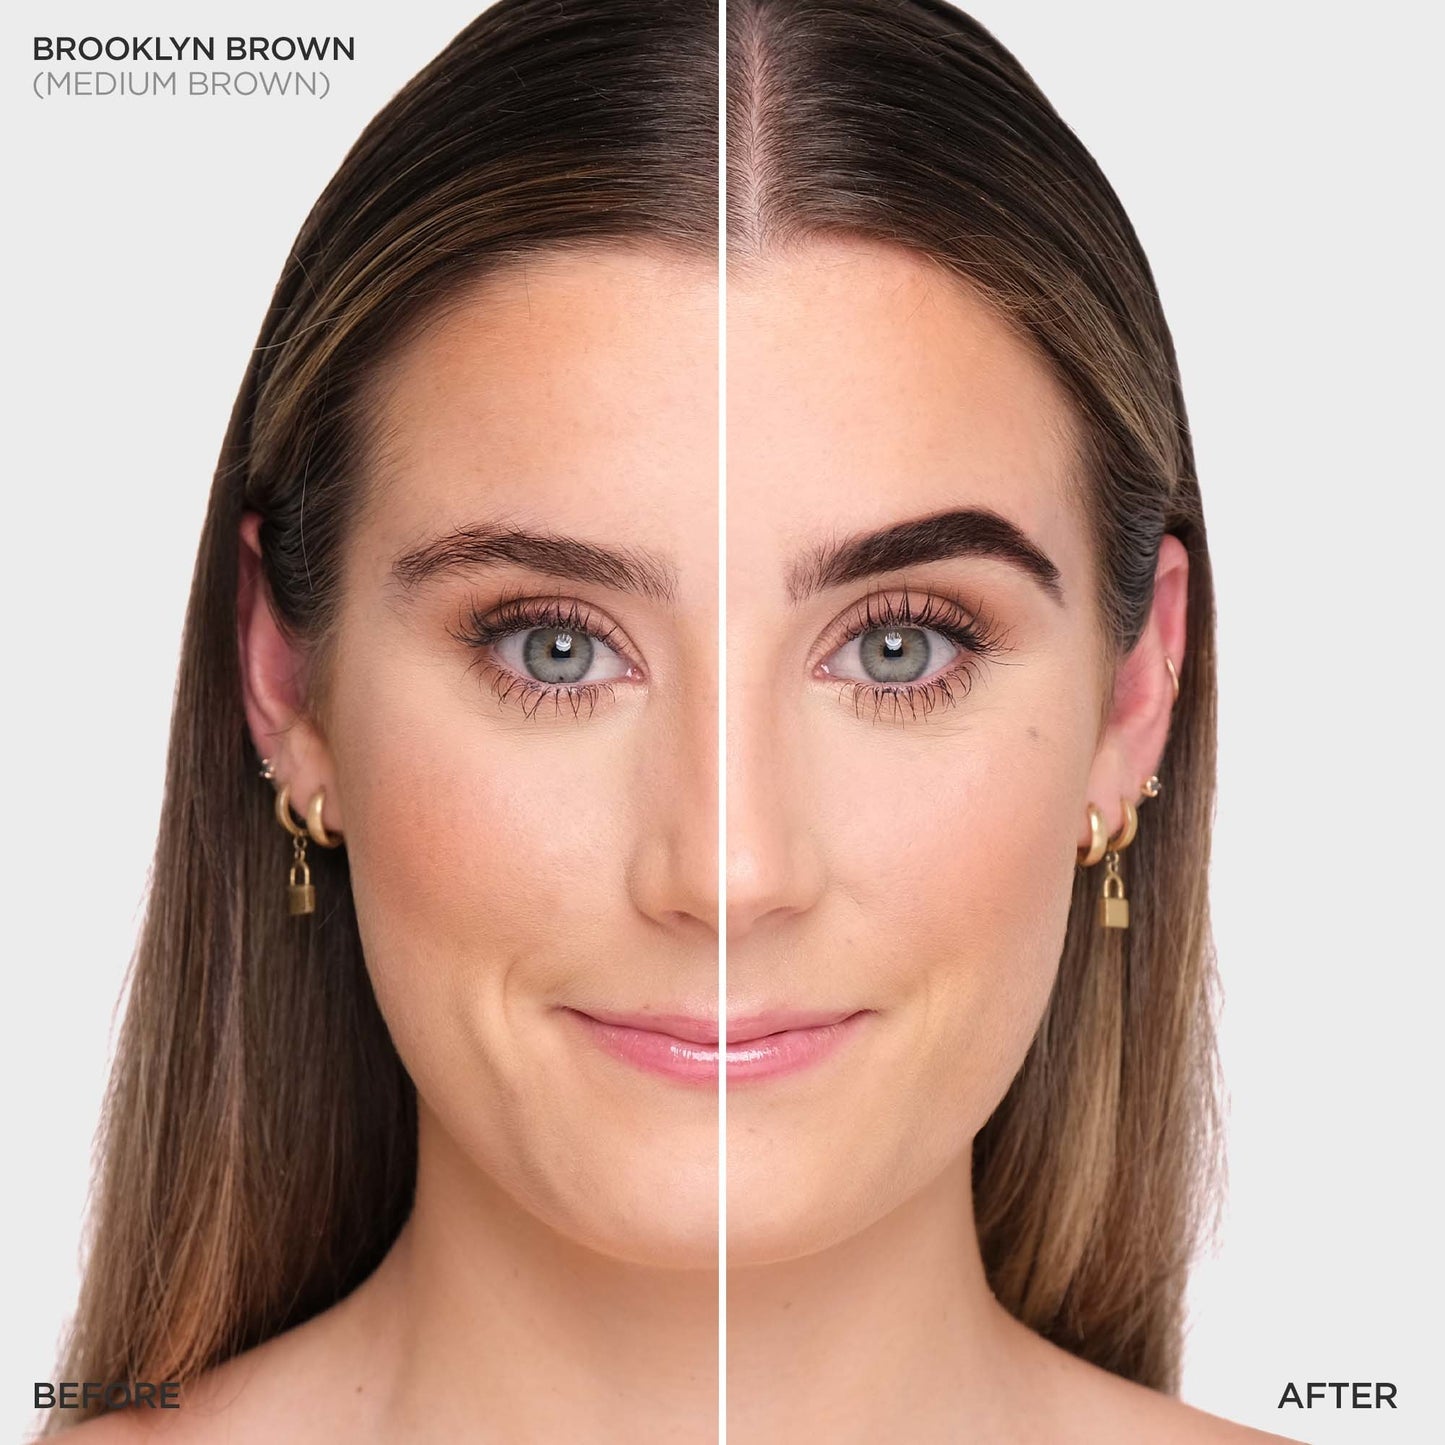 Before and after Color-Brooklyn Brown - Medium Brown